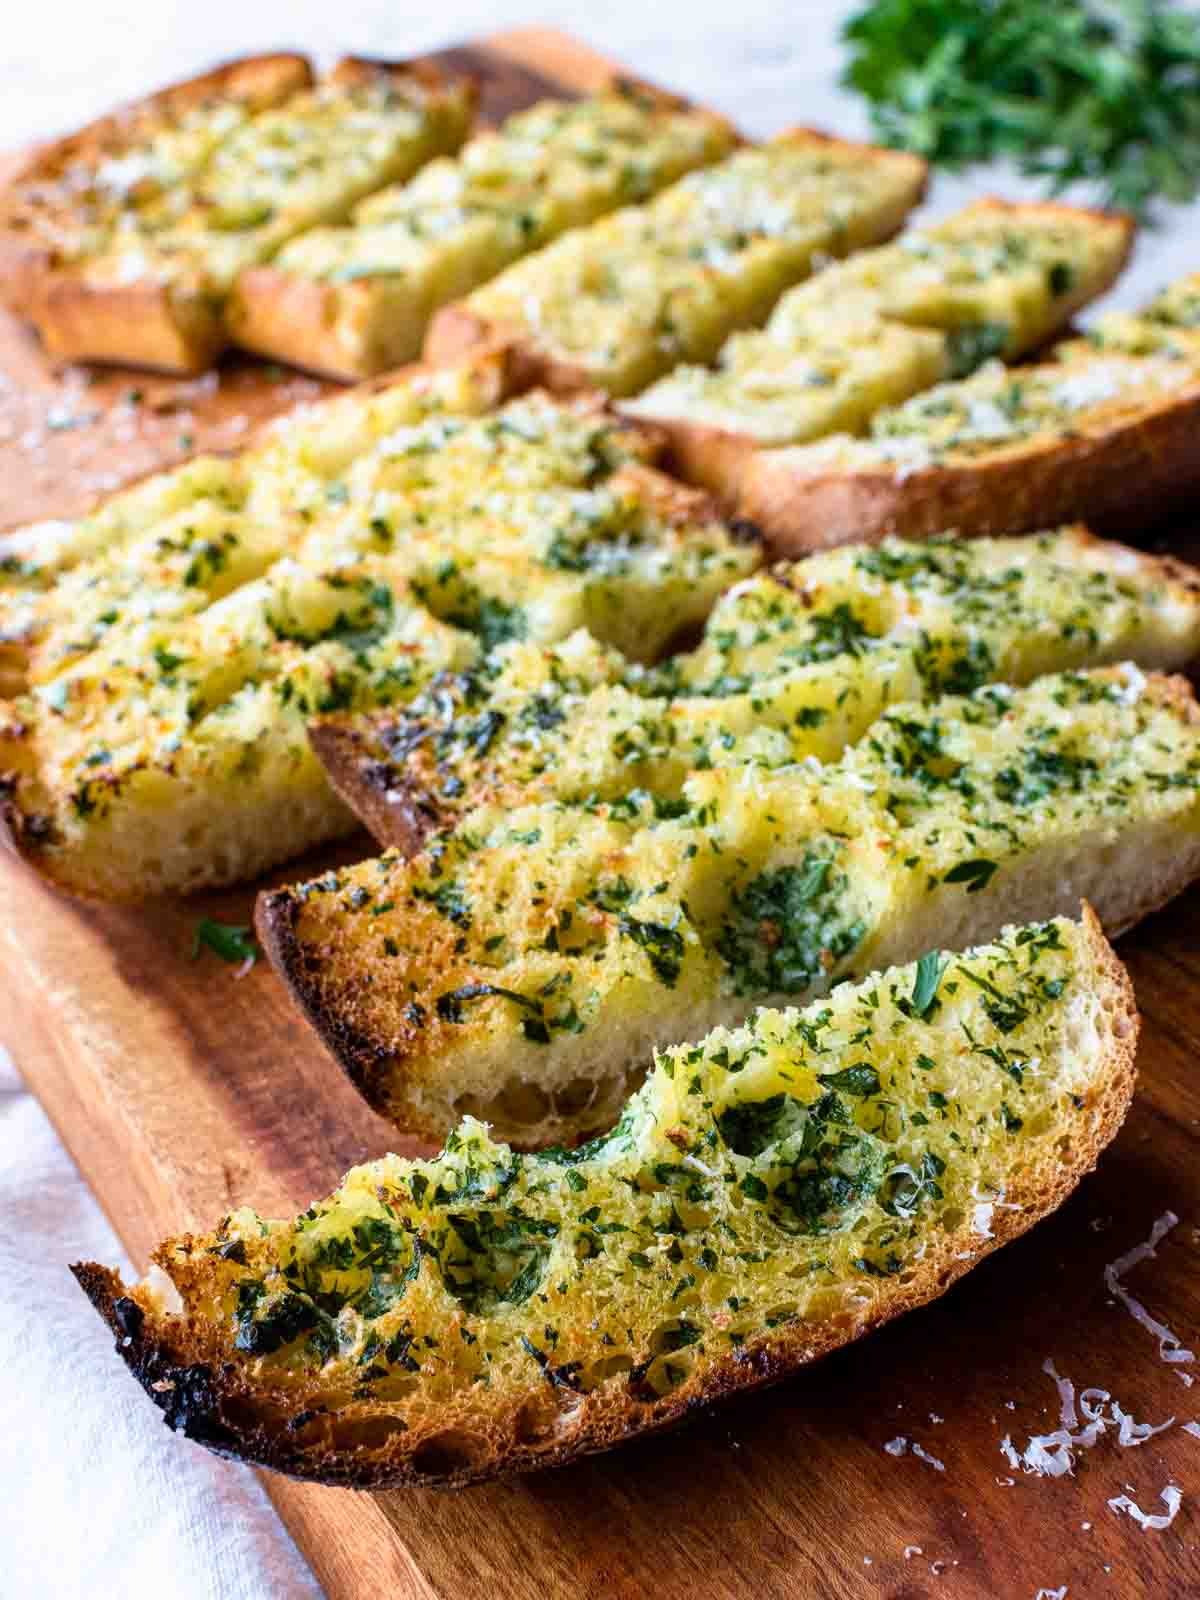 Slices of toasted ciabatta garlic bread topped with herbs.